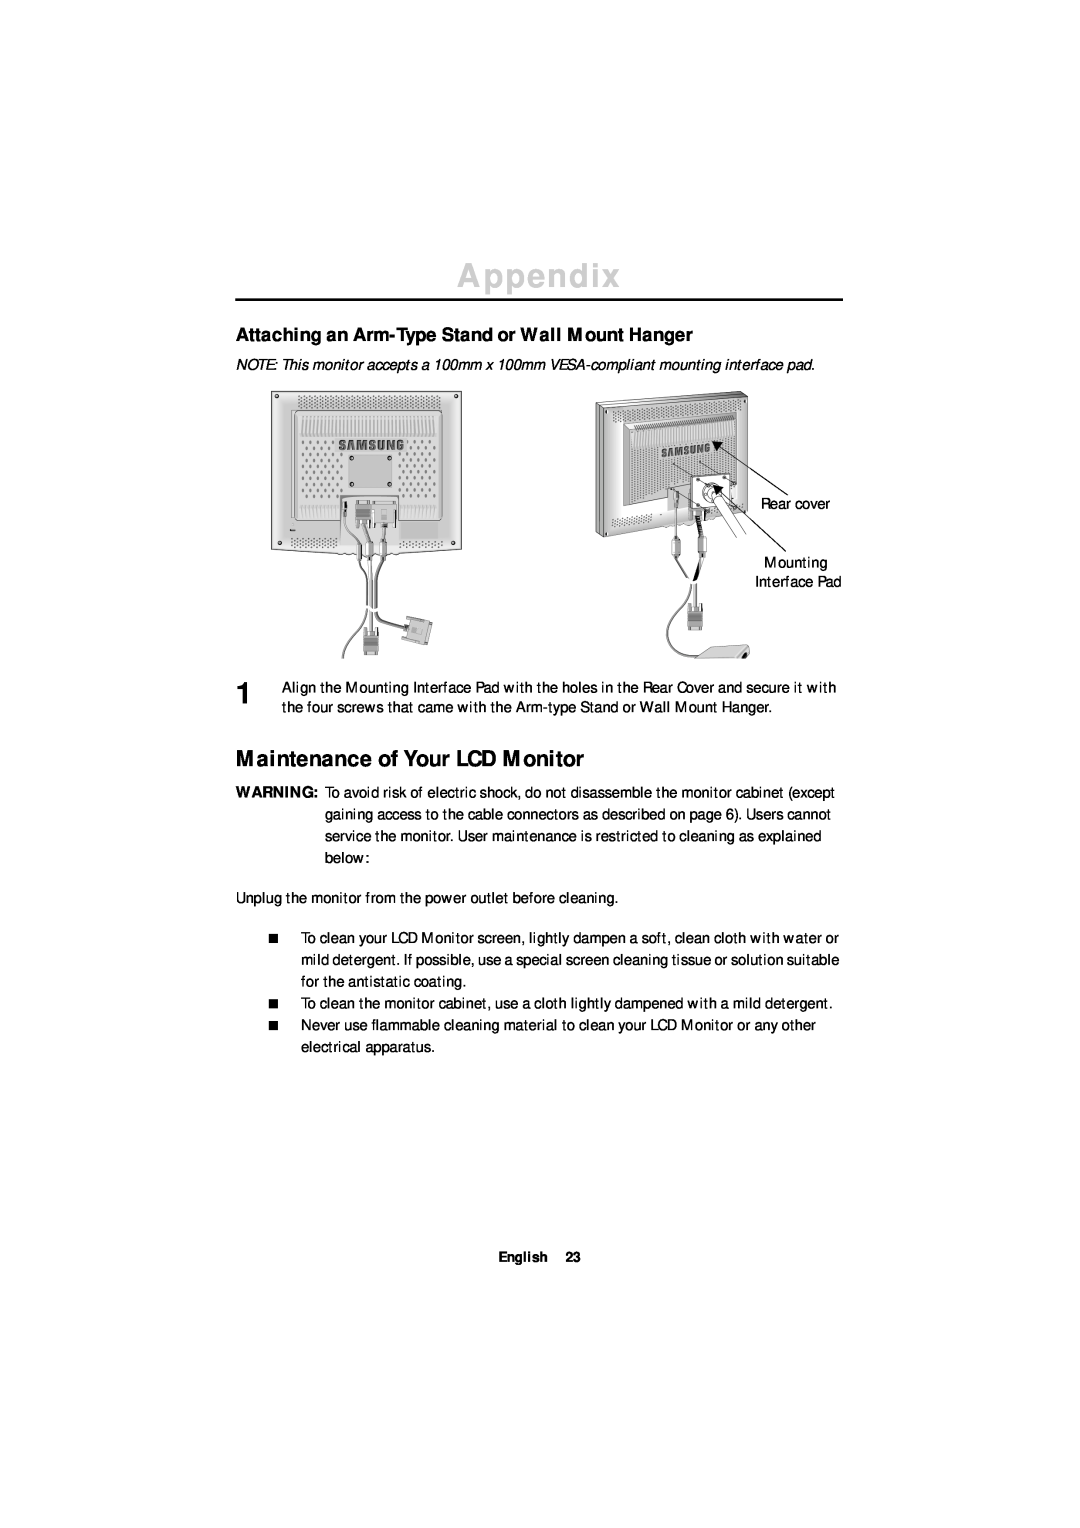 Samsung 180T manual Maintenance of Your LCD Monitor, Attaching an Arm-Type Stand or Wall Mount Hanger, Appendix 